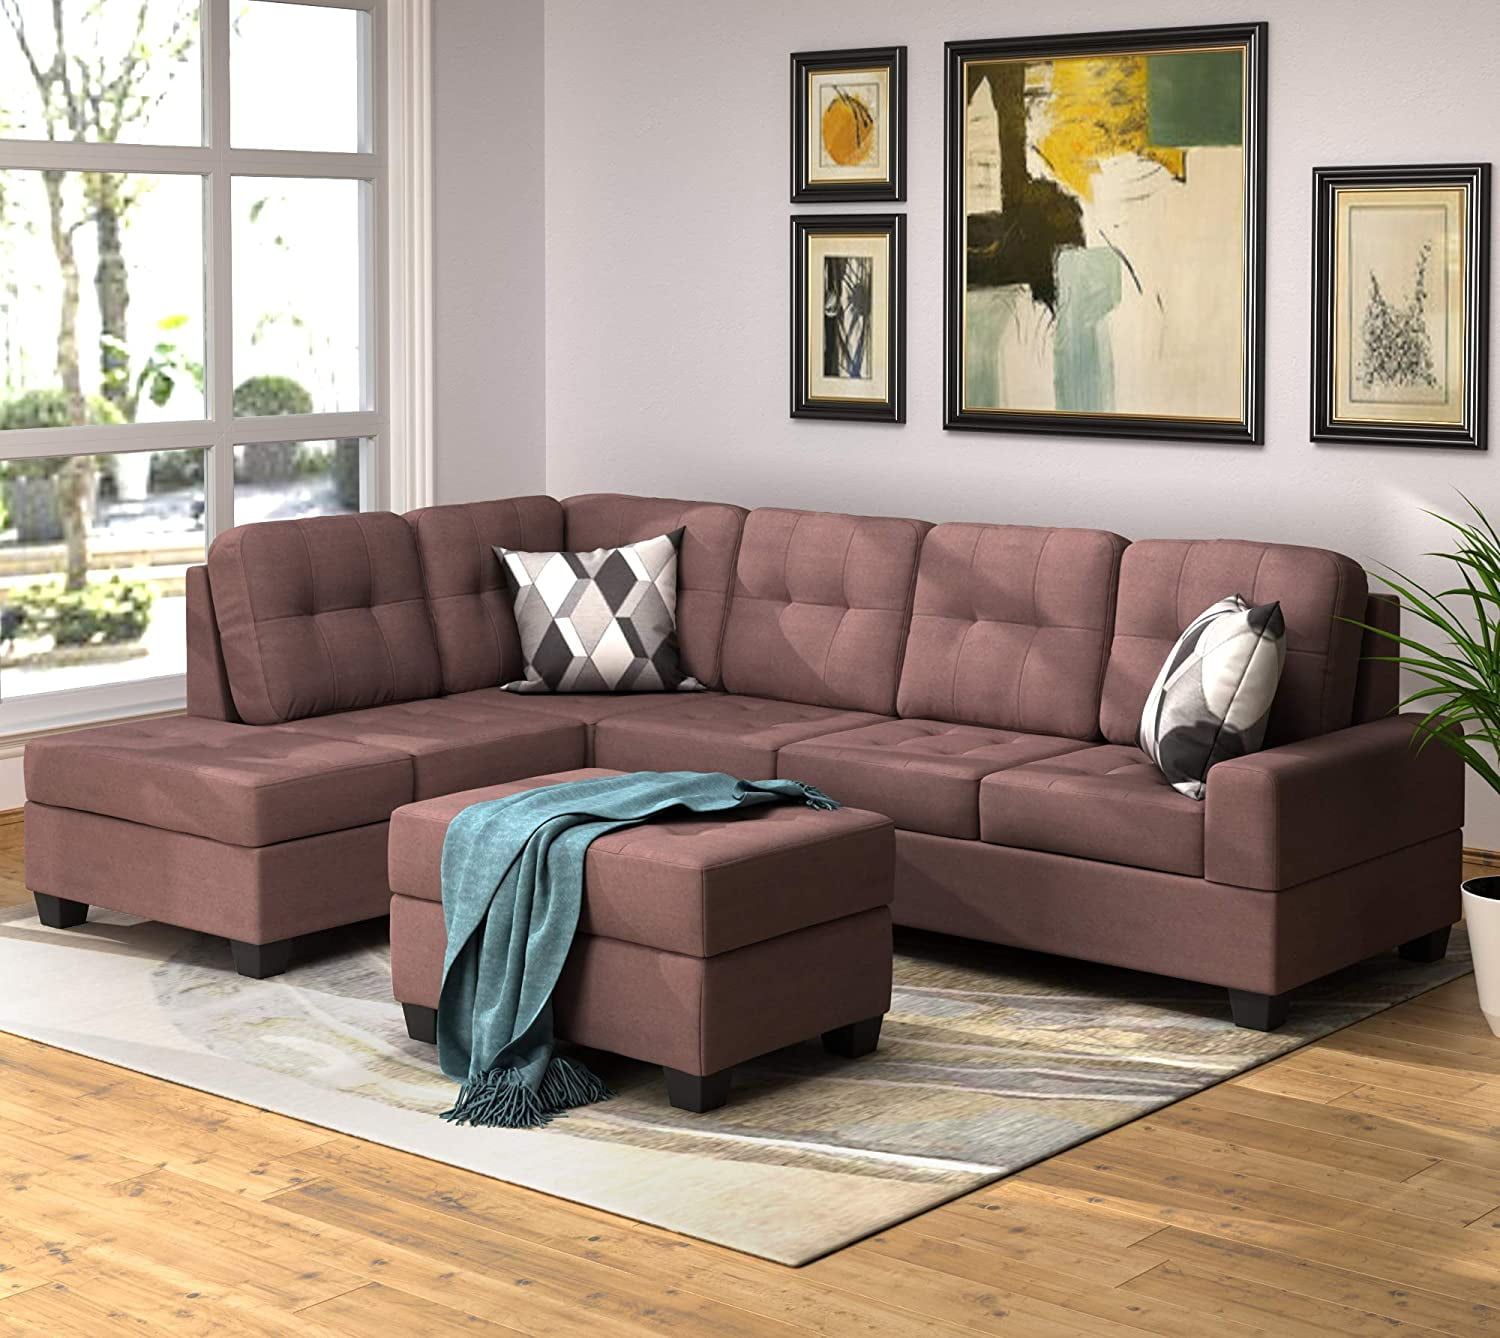 Soges Suede L Shape Sectional Sofa With Reversible Chaise Lounge For In L Shape Couches With Reversible Chaises (Gallery 11 of 20)